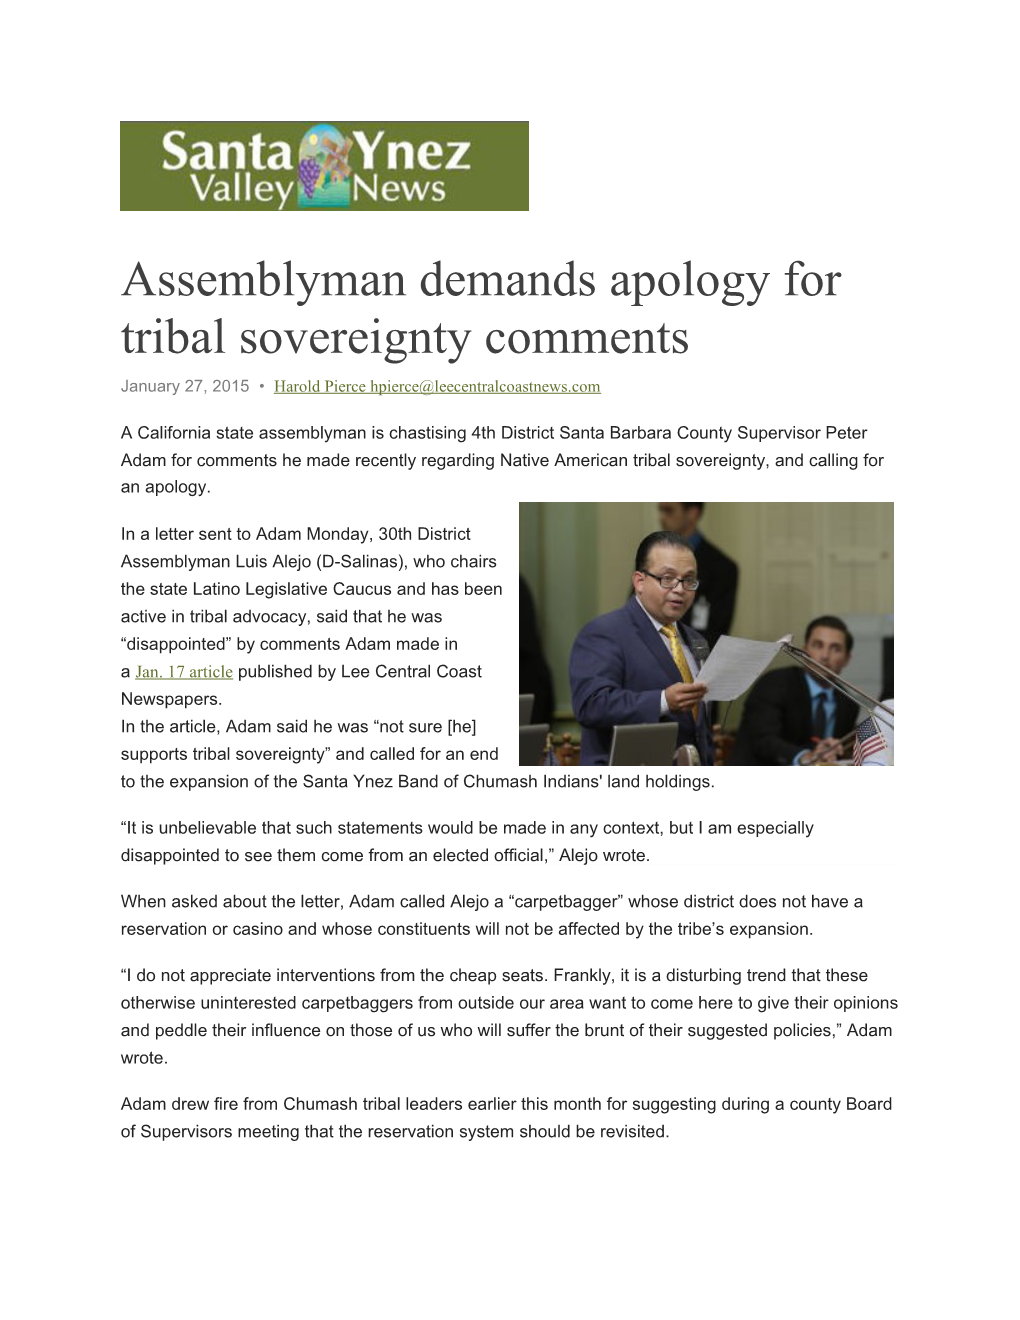 Assemblyman Demands Apology for Tribal Sovereignty Comments